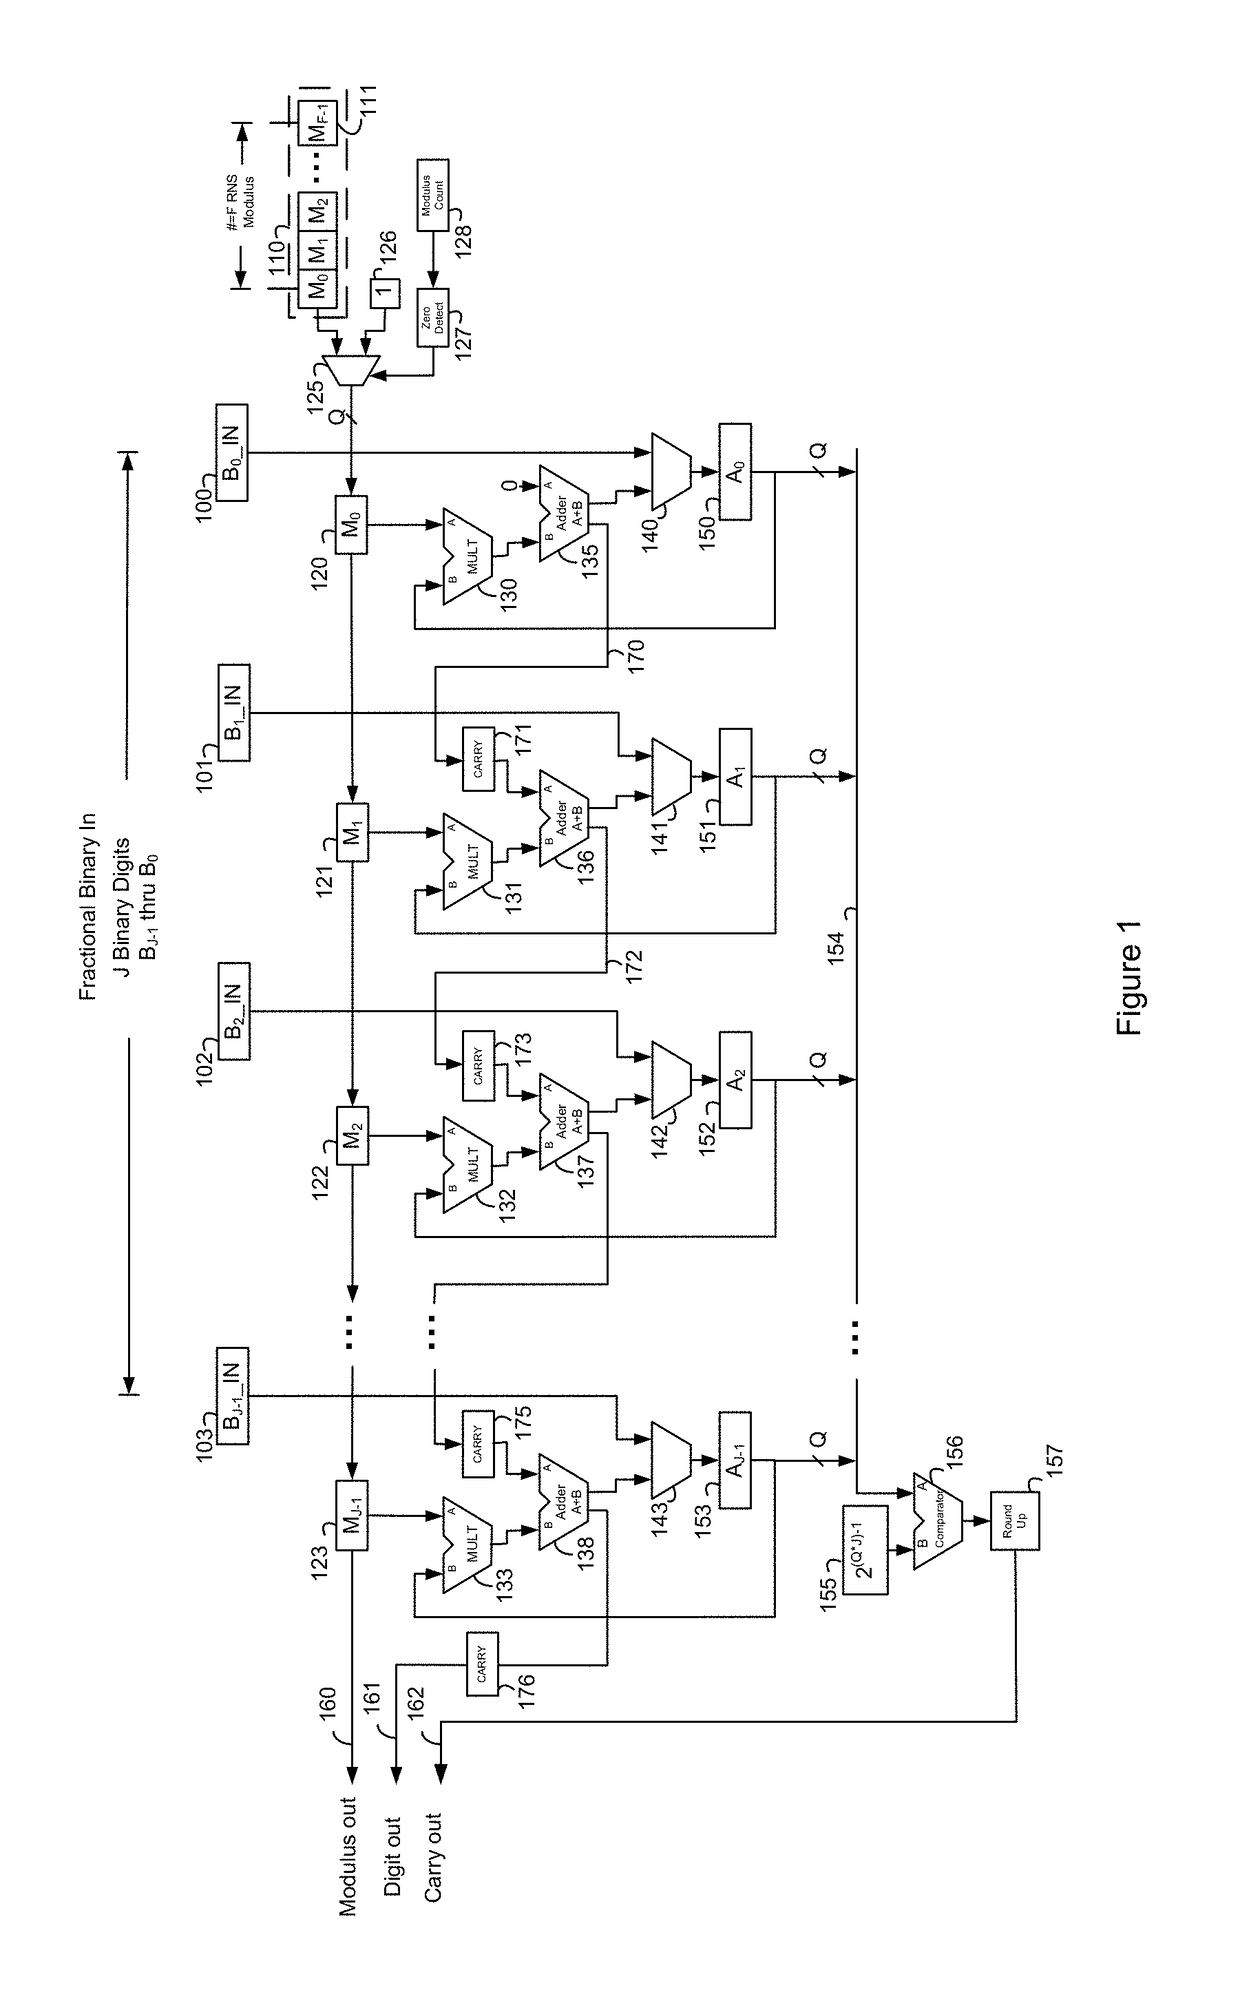 System and method for improved fractional binary to fractional residue converter and multipler